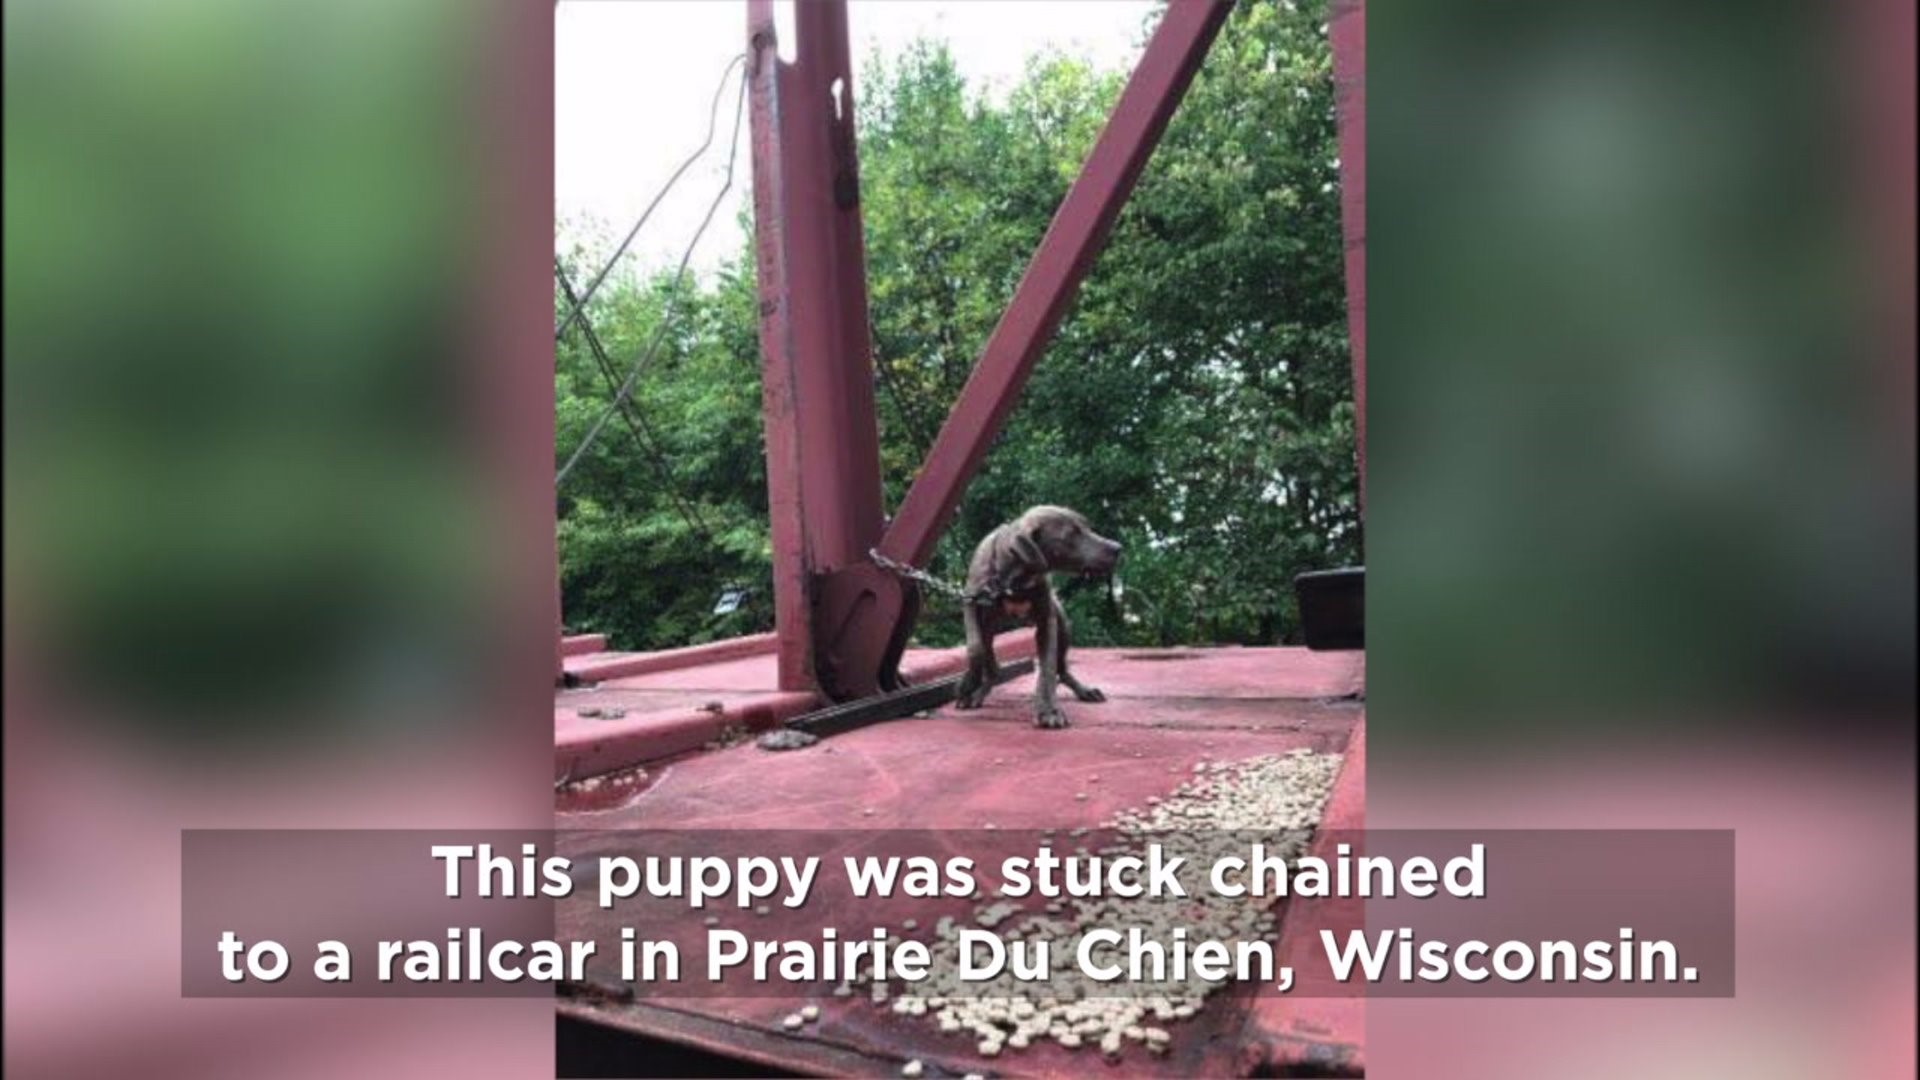 Pup found tied to railcar